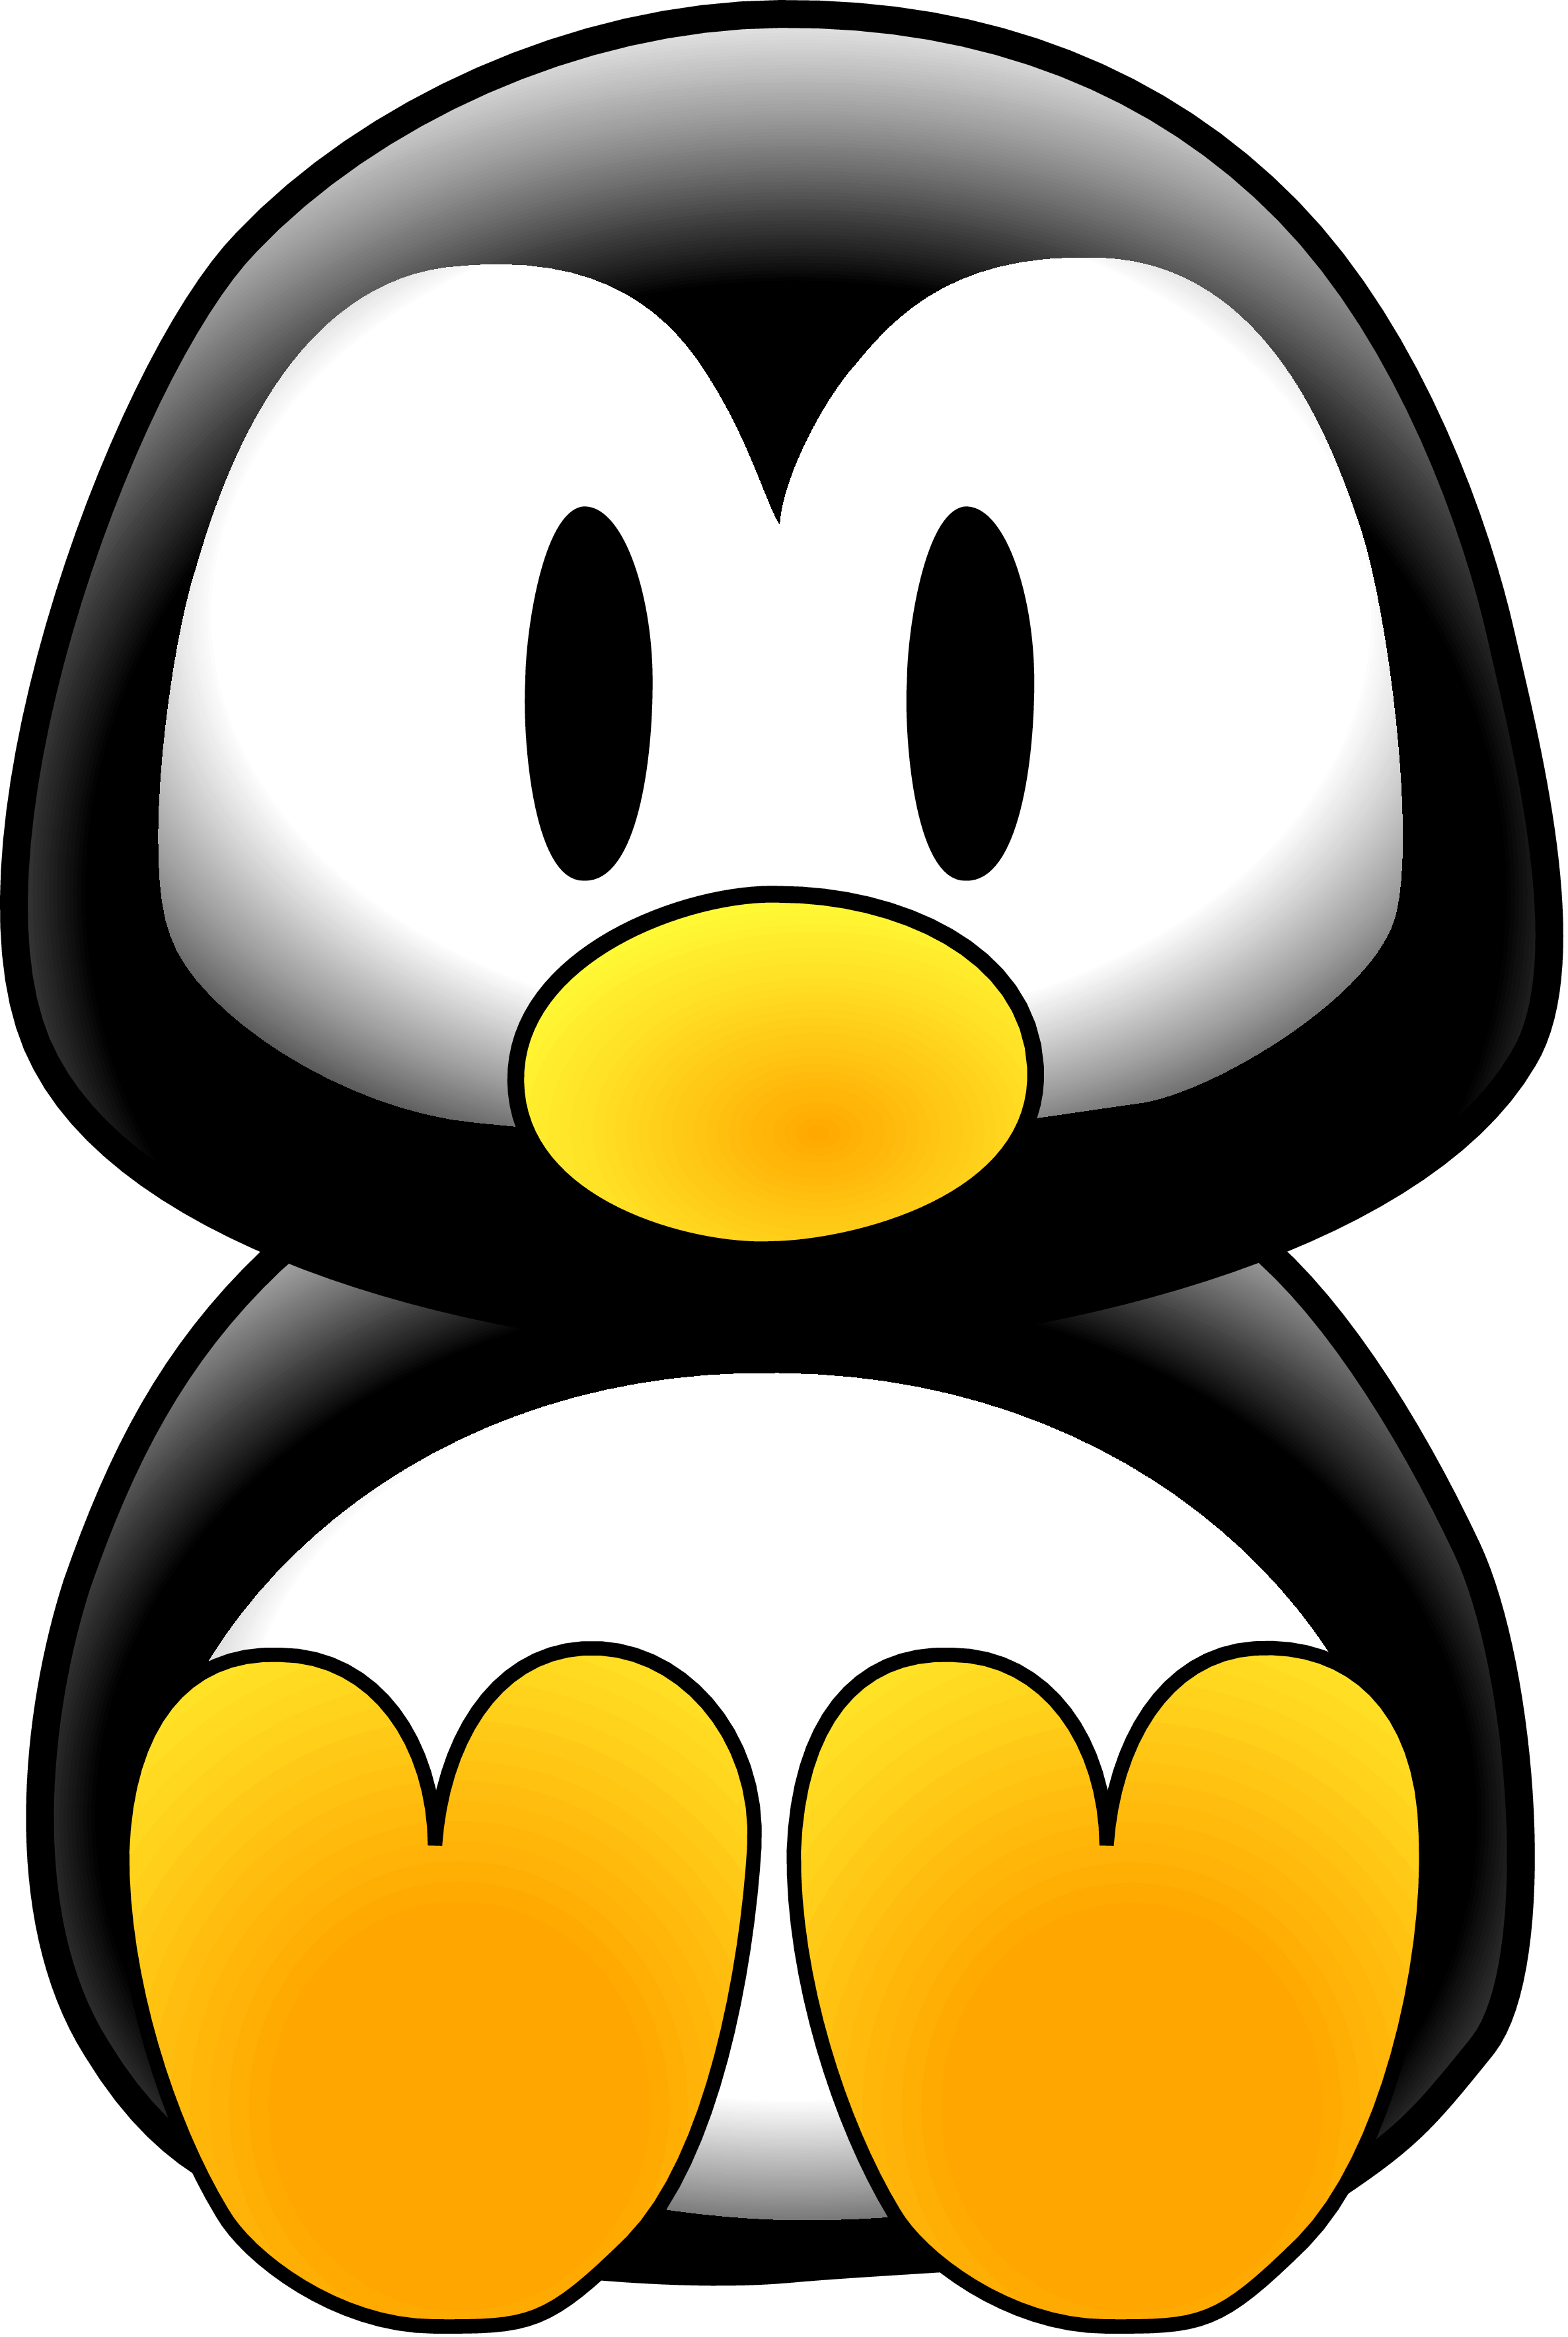 Baby penguin free images. Clipart walking dictionary